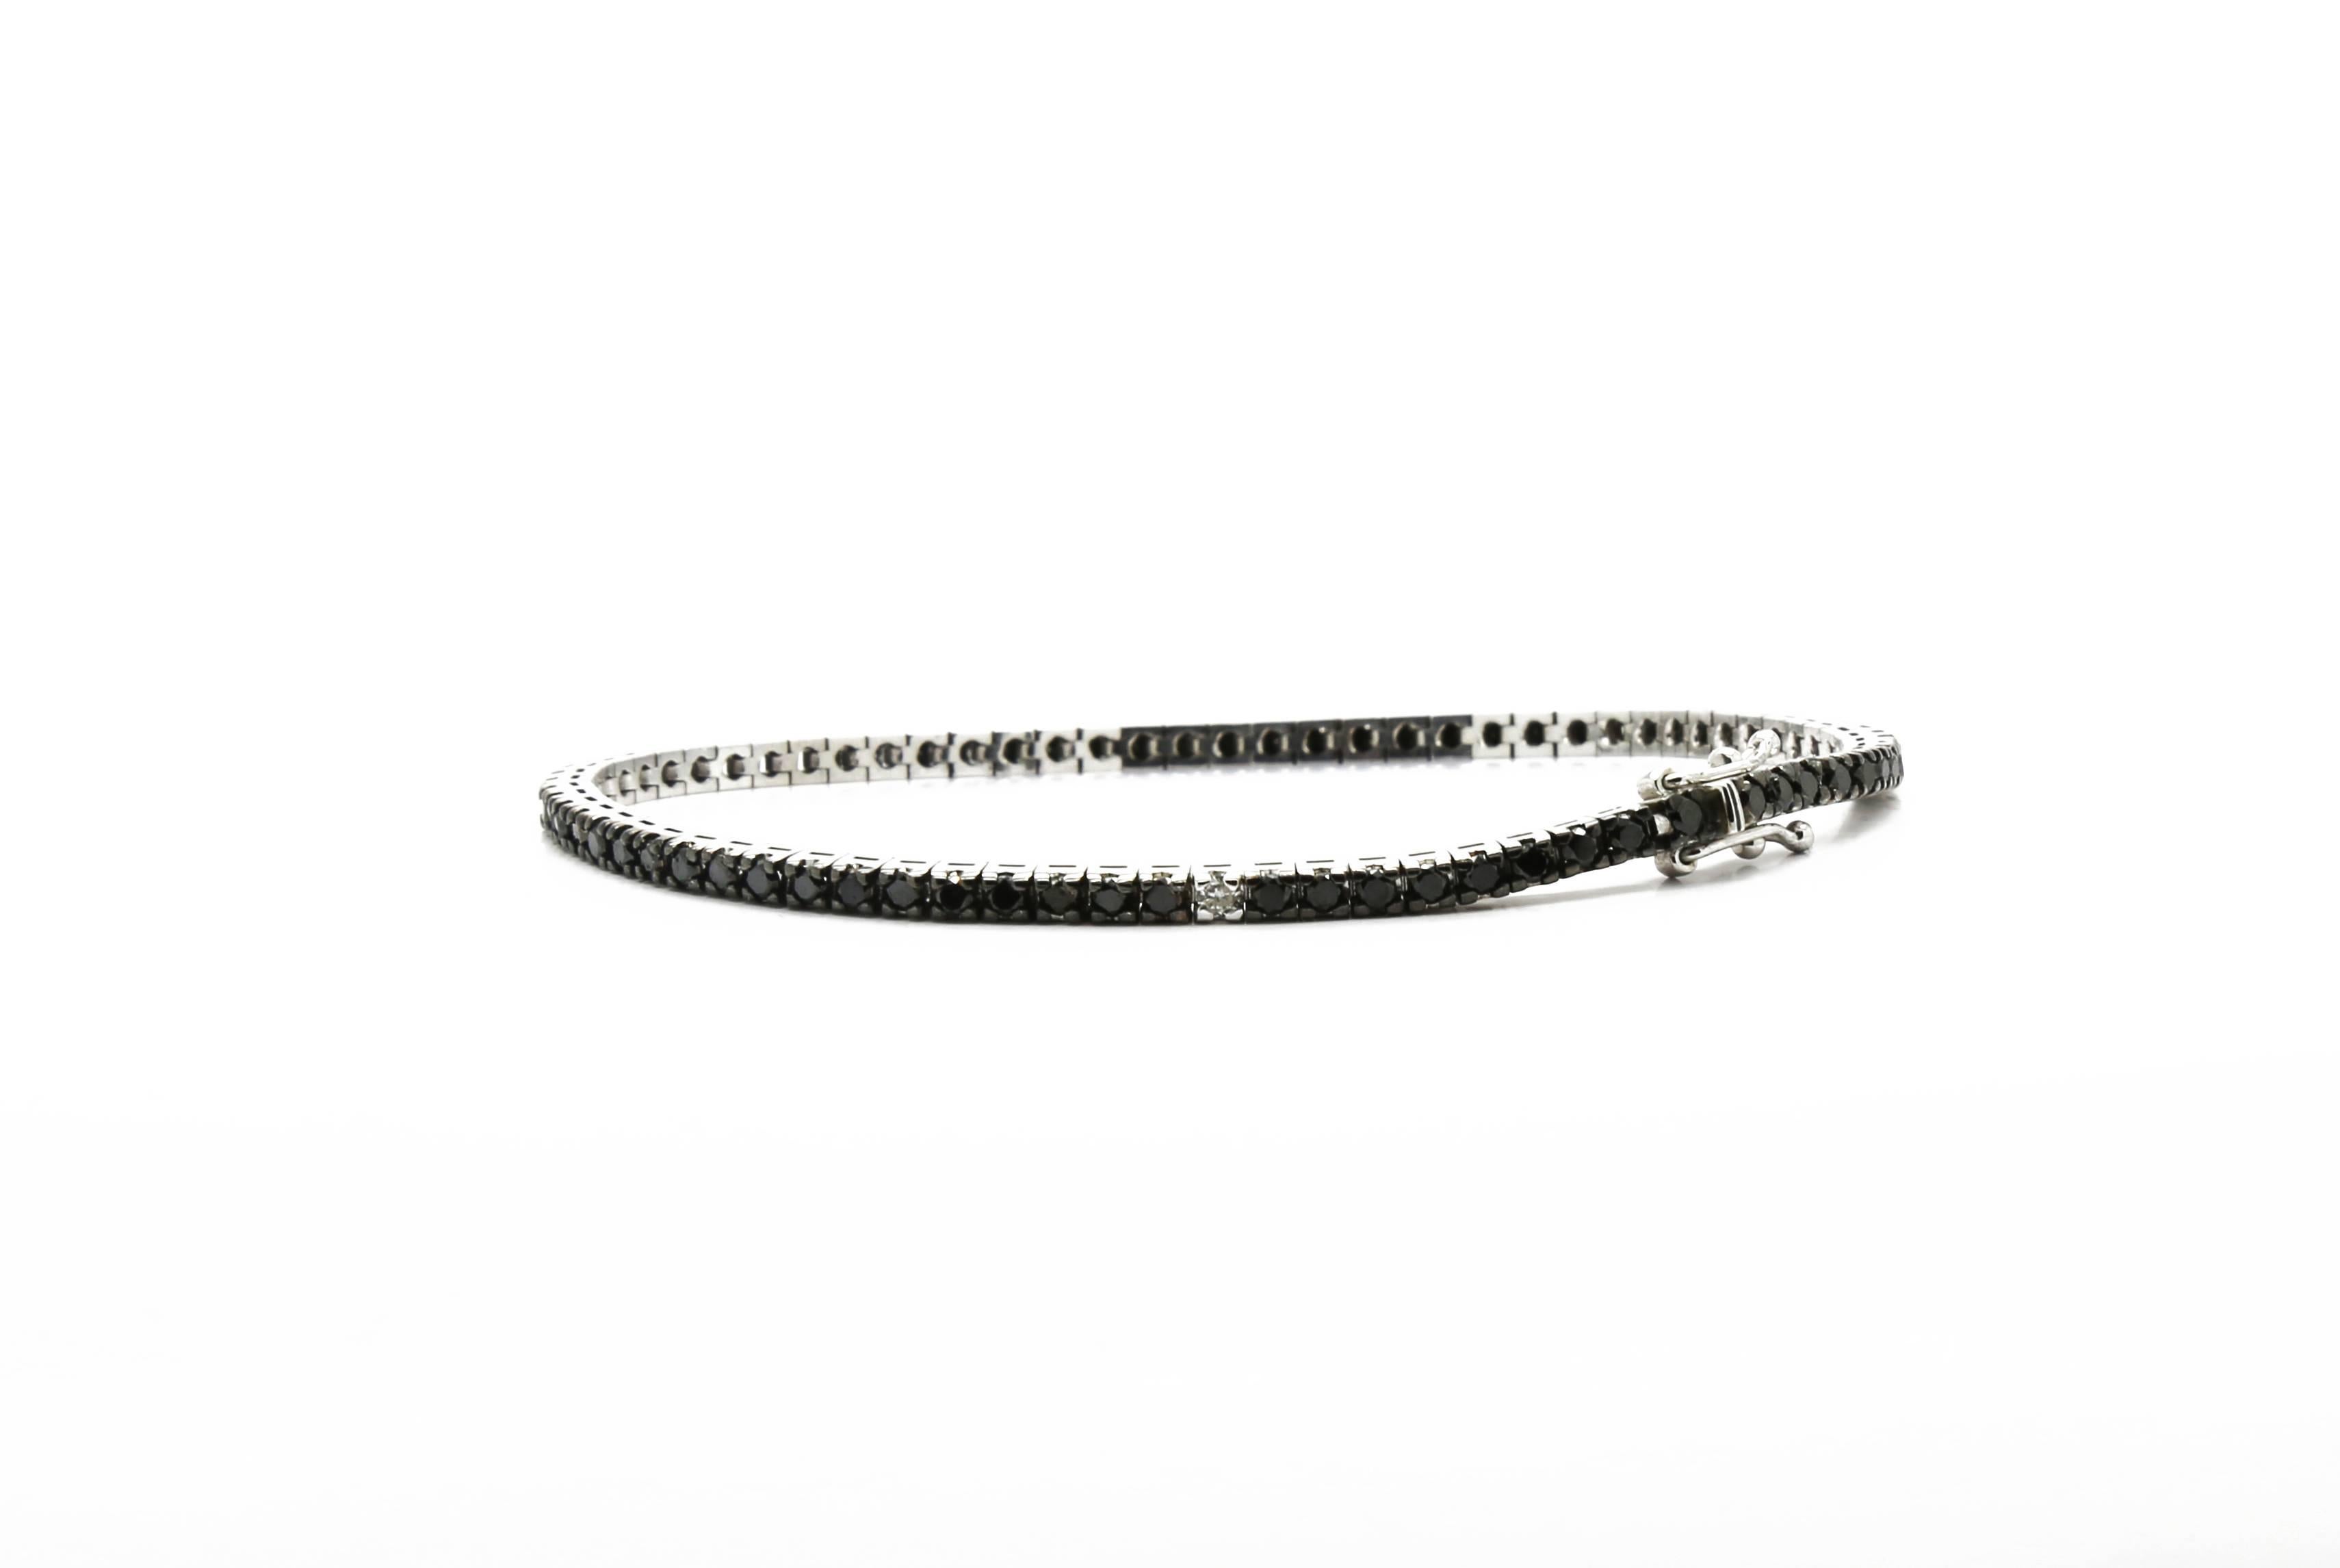 Tennis Black Diamonds bracelet with one white diamond by FERRUCCI elegant and sophisticated, yet redesign for an edgy modern look, Made in Italy 

Black Diamonds total carat weight 2.70 ct

White Diamond carat weight 0.04 ct